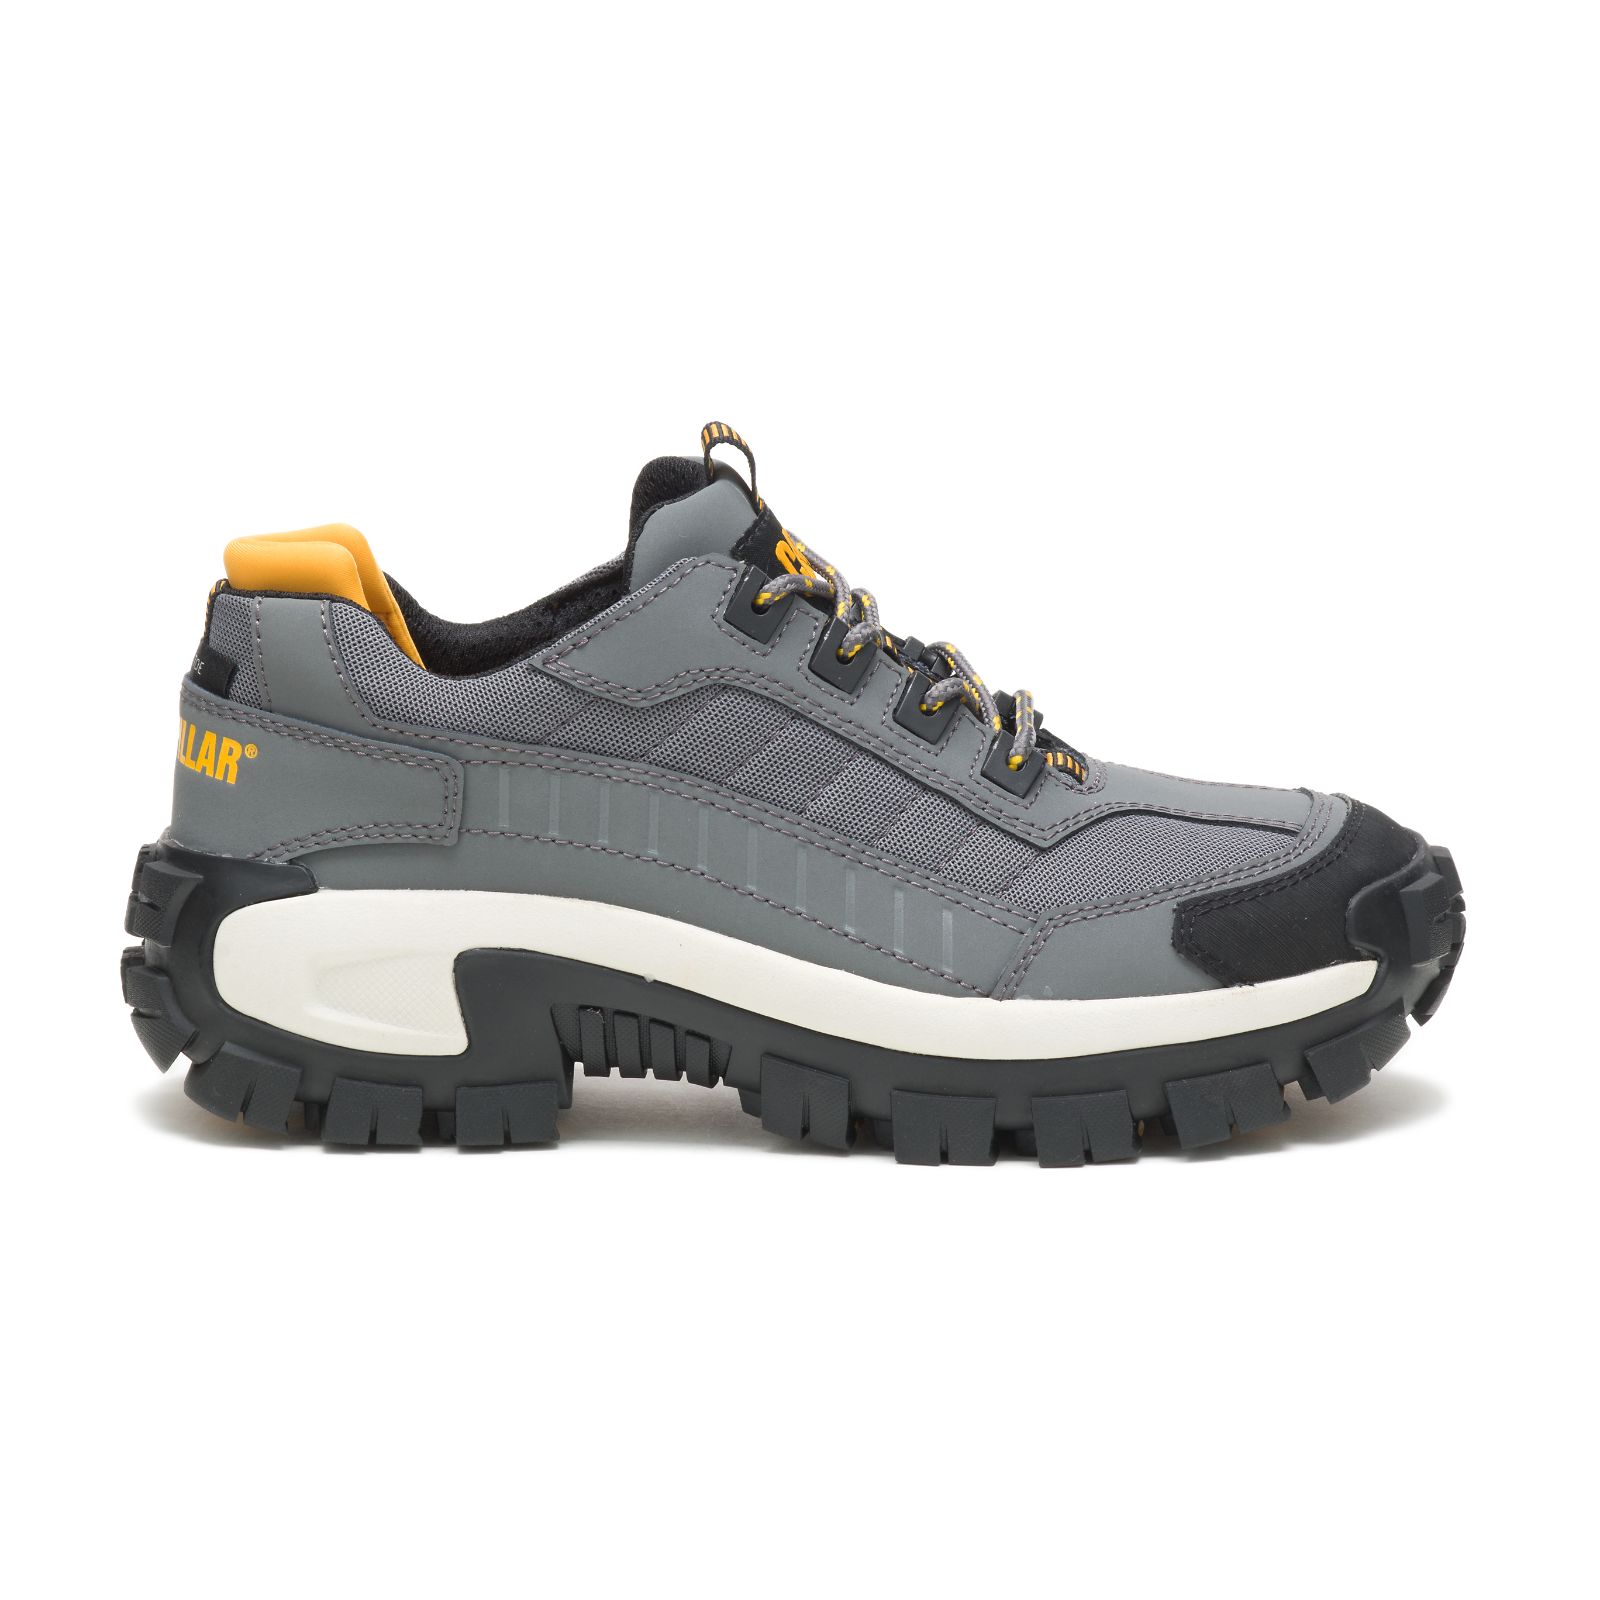 Caterpillar Invader Steel Toe Philippines - Mens Work Shoes - Grey 01983QCUW